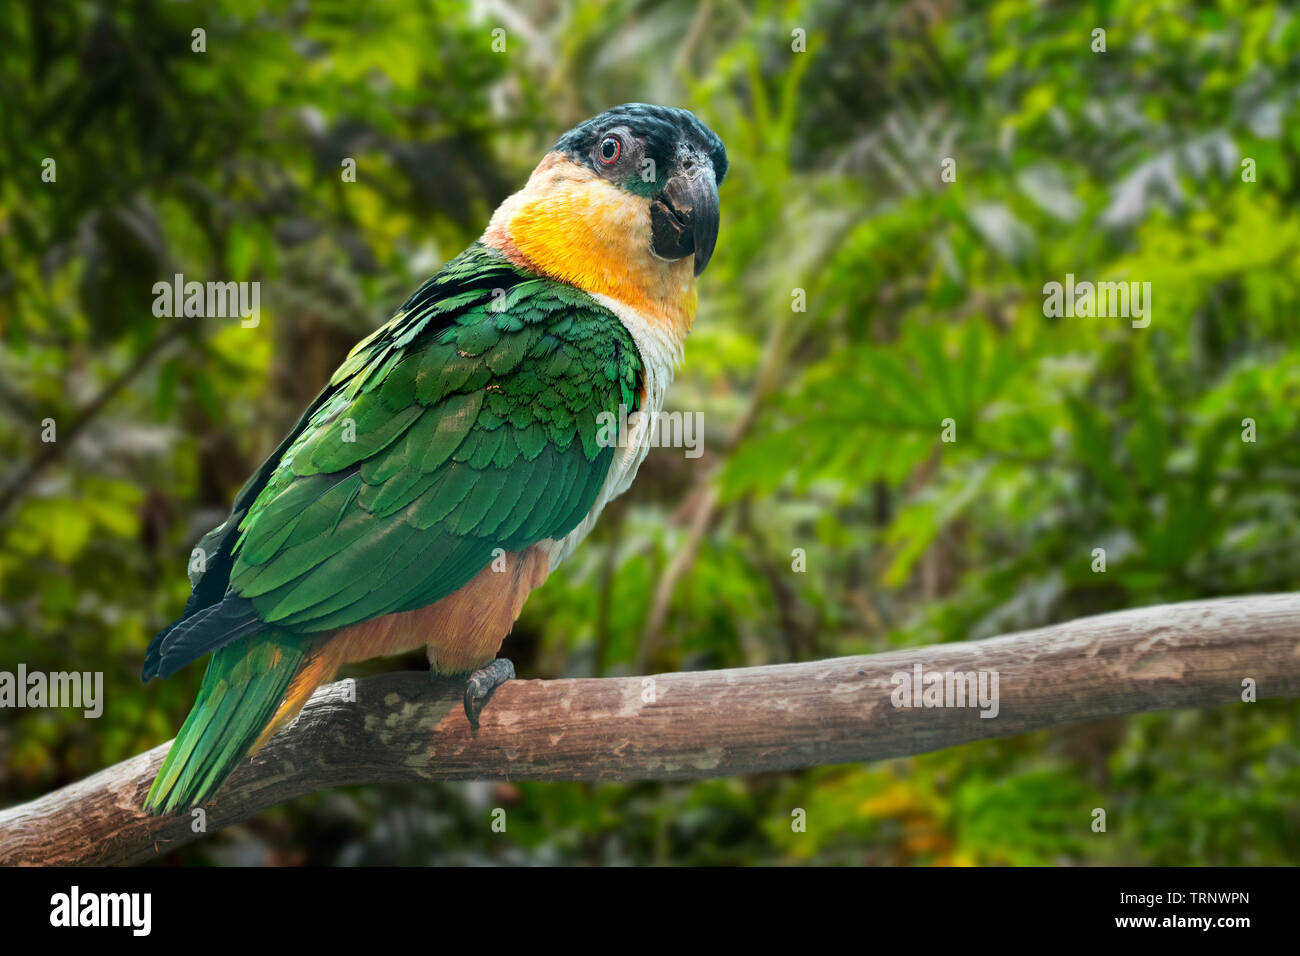 Black-headed parrot / black-headed caique / black-capped parrot (Pionites melanocephalus) perched in tree in rain forest, native to South America Stock Photo